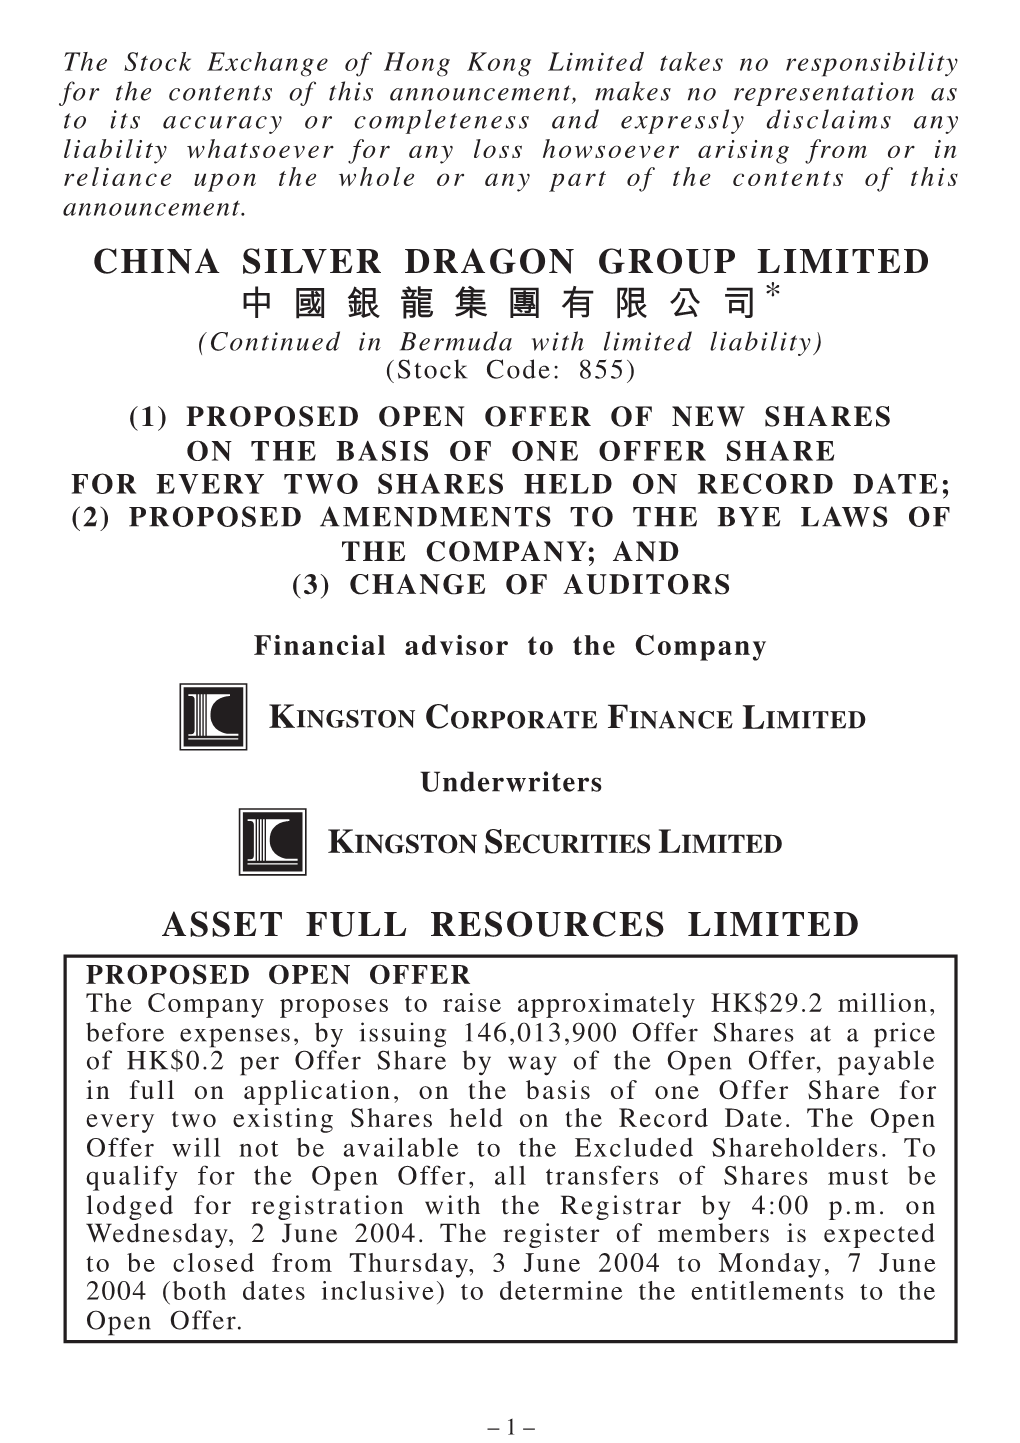 China Silver Dragon Group Limited 中 國 銀 龍 集 團 有 限 公 司 * Asset Full Resources Limited